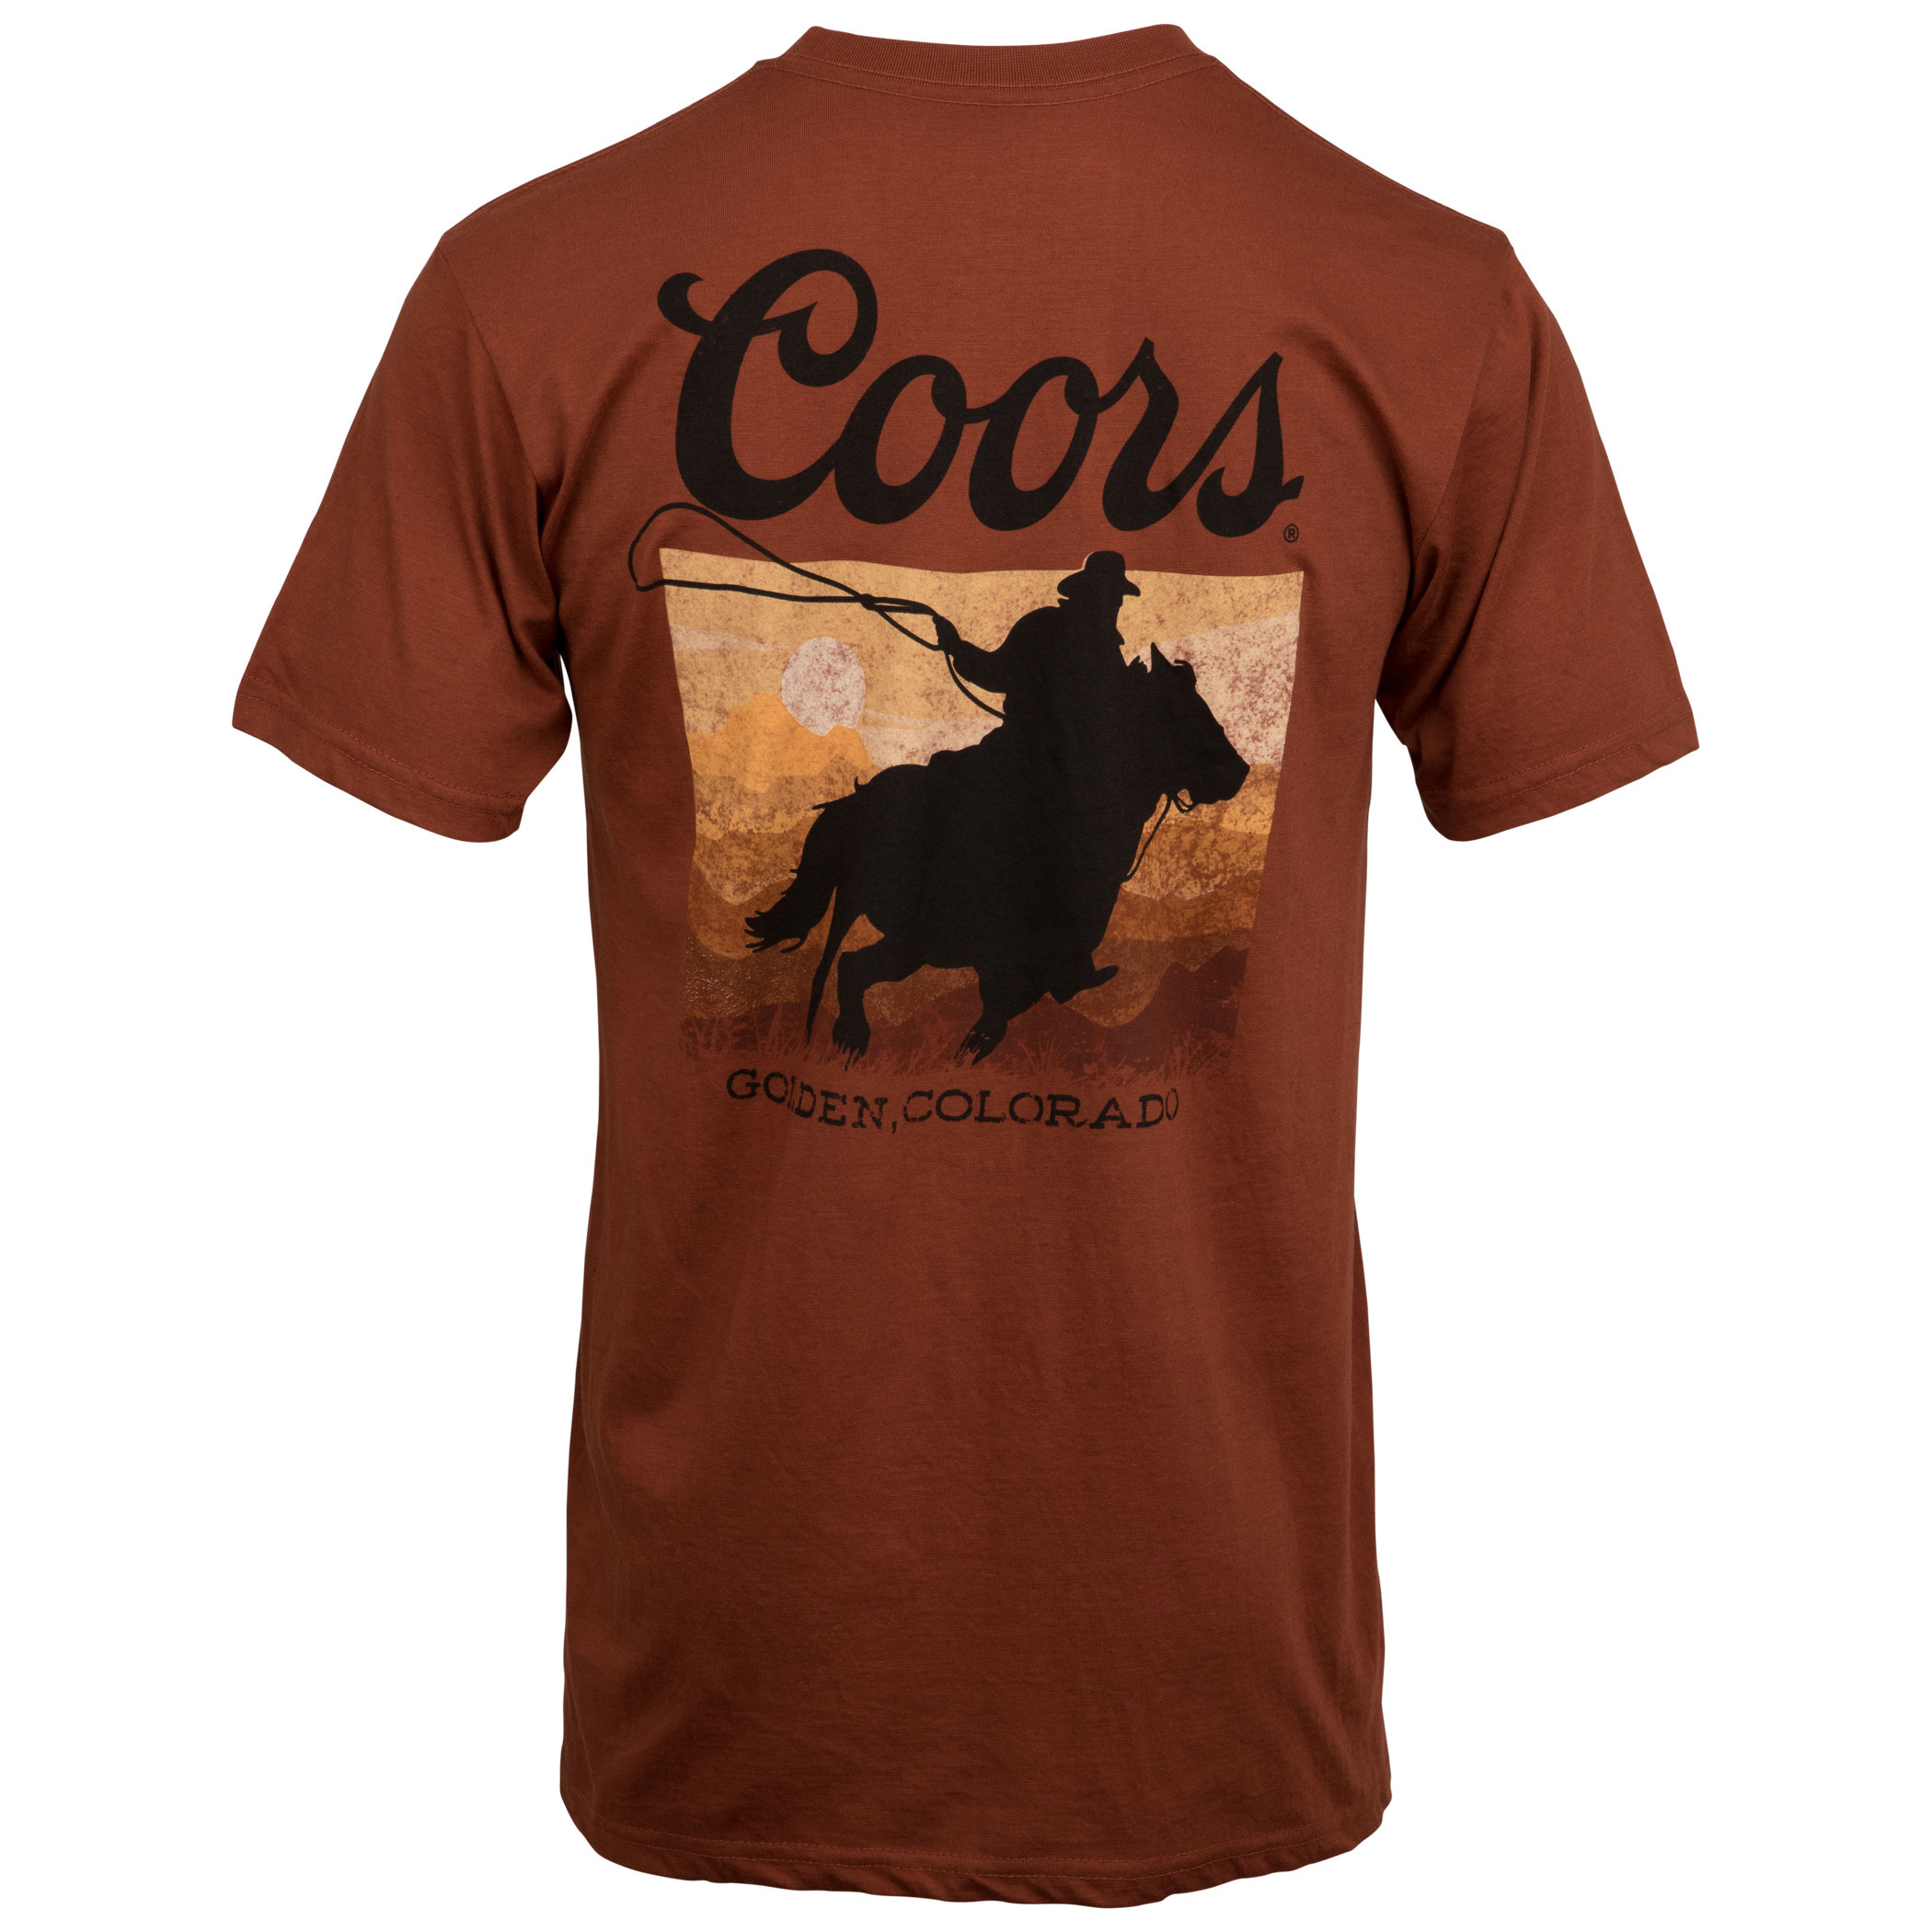 Coors Sunset Rider Front and Back Print T-Shirt